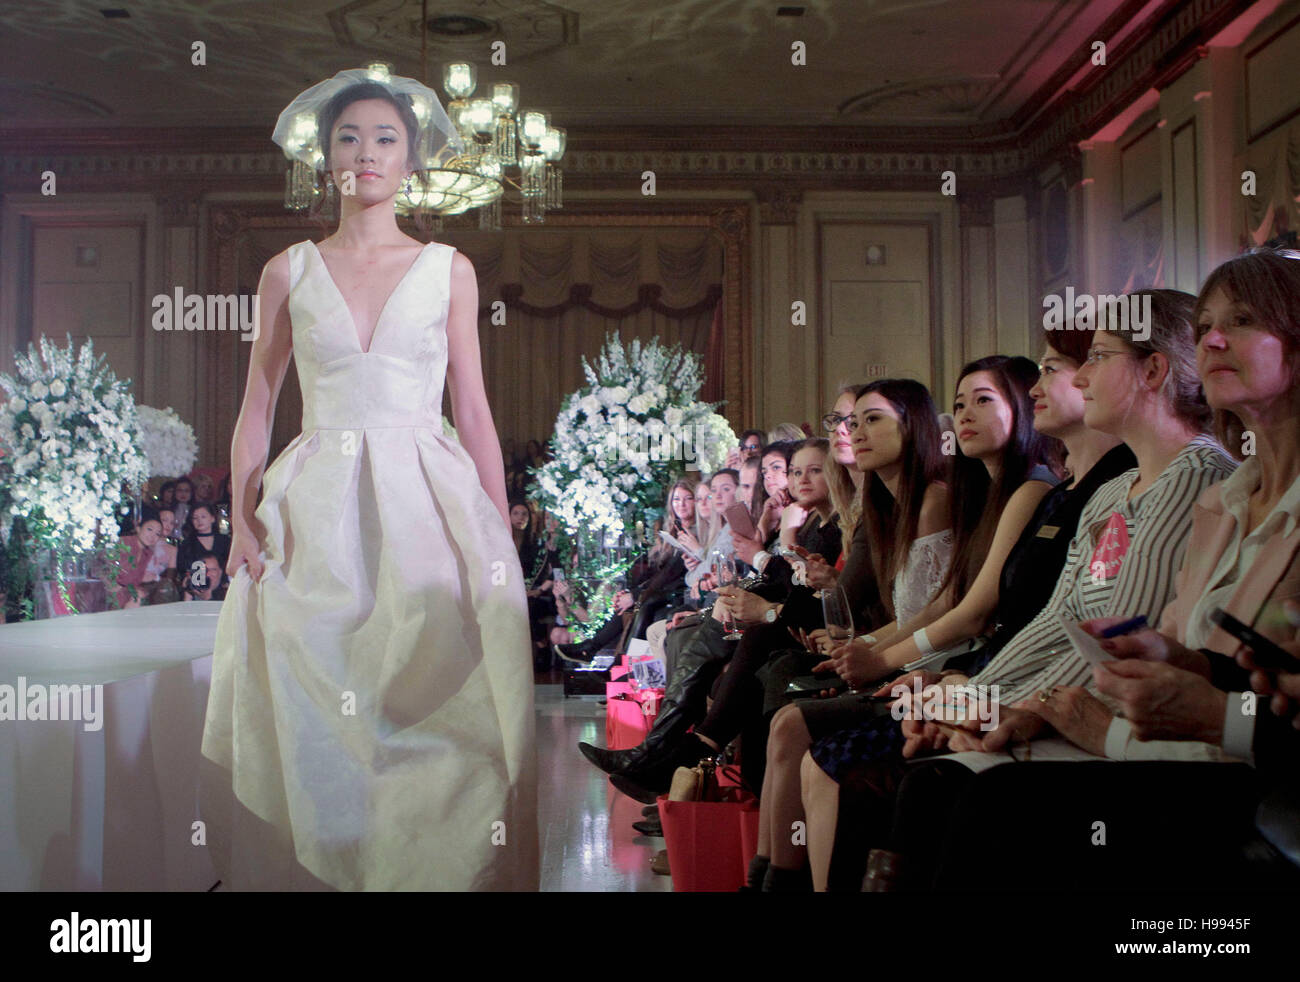 Vancouver, Canada. 20th Nov, 2016. Visitors watch the wedding dress show during the CREME DE LA CREME Grand Wedding Showcase event in Vancouver, Canada, Nov. 20, 2016. The annual CREME DE LA CREME Grand Wedding Showcase is Vancouver's most luxury wedding show event showcasing hi-end wedding gowns, services, venue designs and wedding products for the high society brides. Credit:  Liang Sen/Xinhua/Alamy Live News Stock Photo